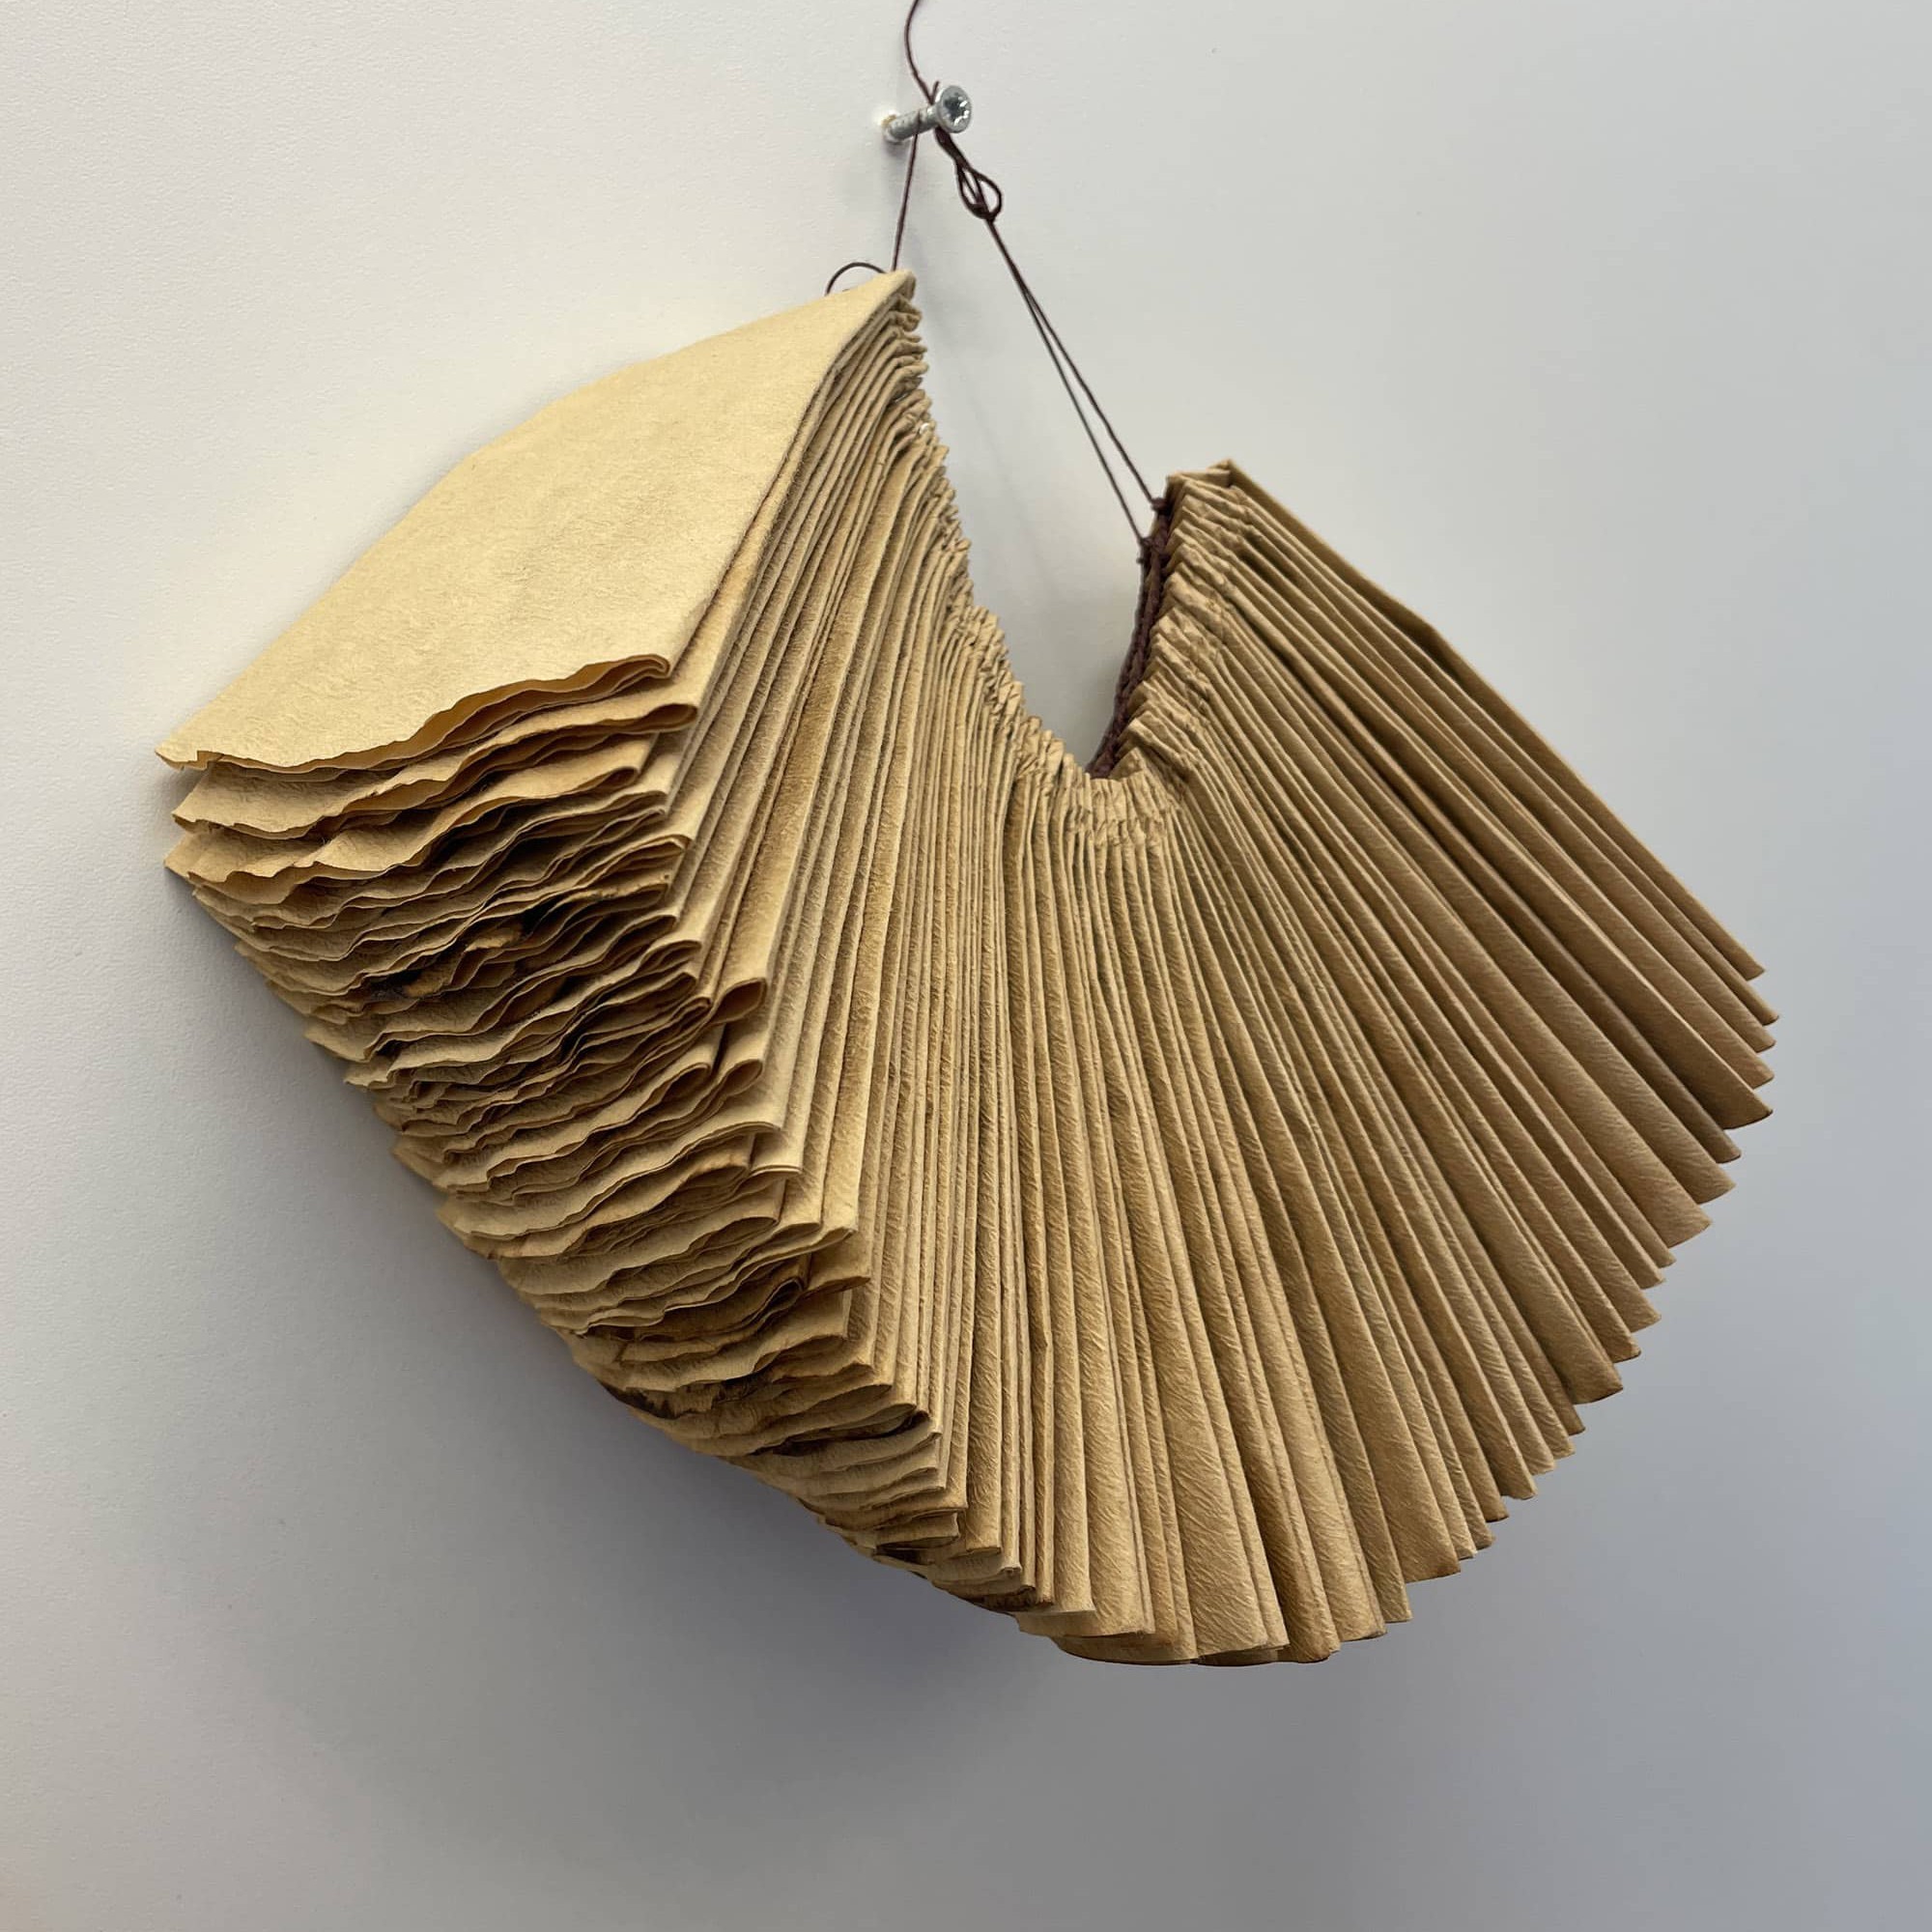 Expositie: Used coffee filter mail art project @ NO ART FASHION